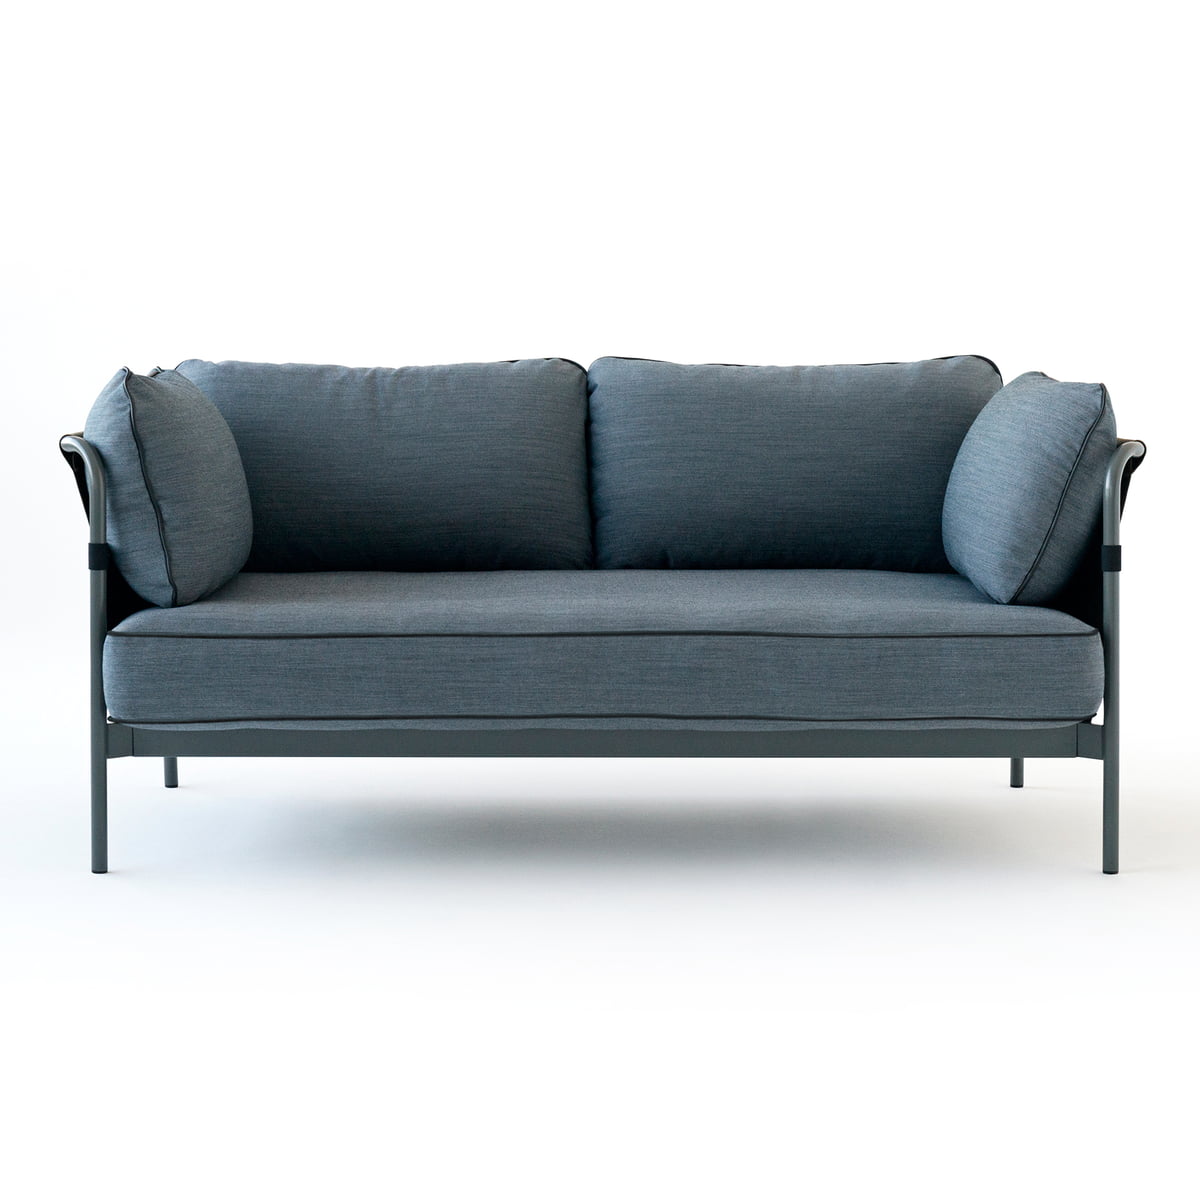 Can 2 Seater Sofa By Hay In Our Interior Design Shop